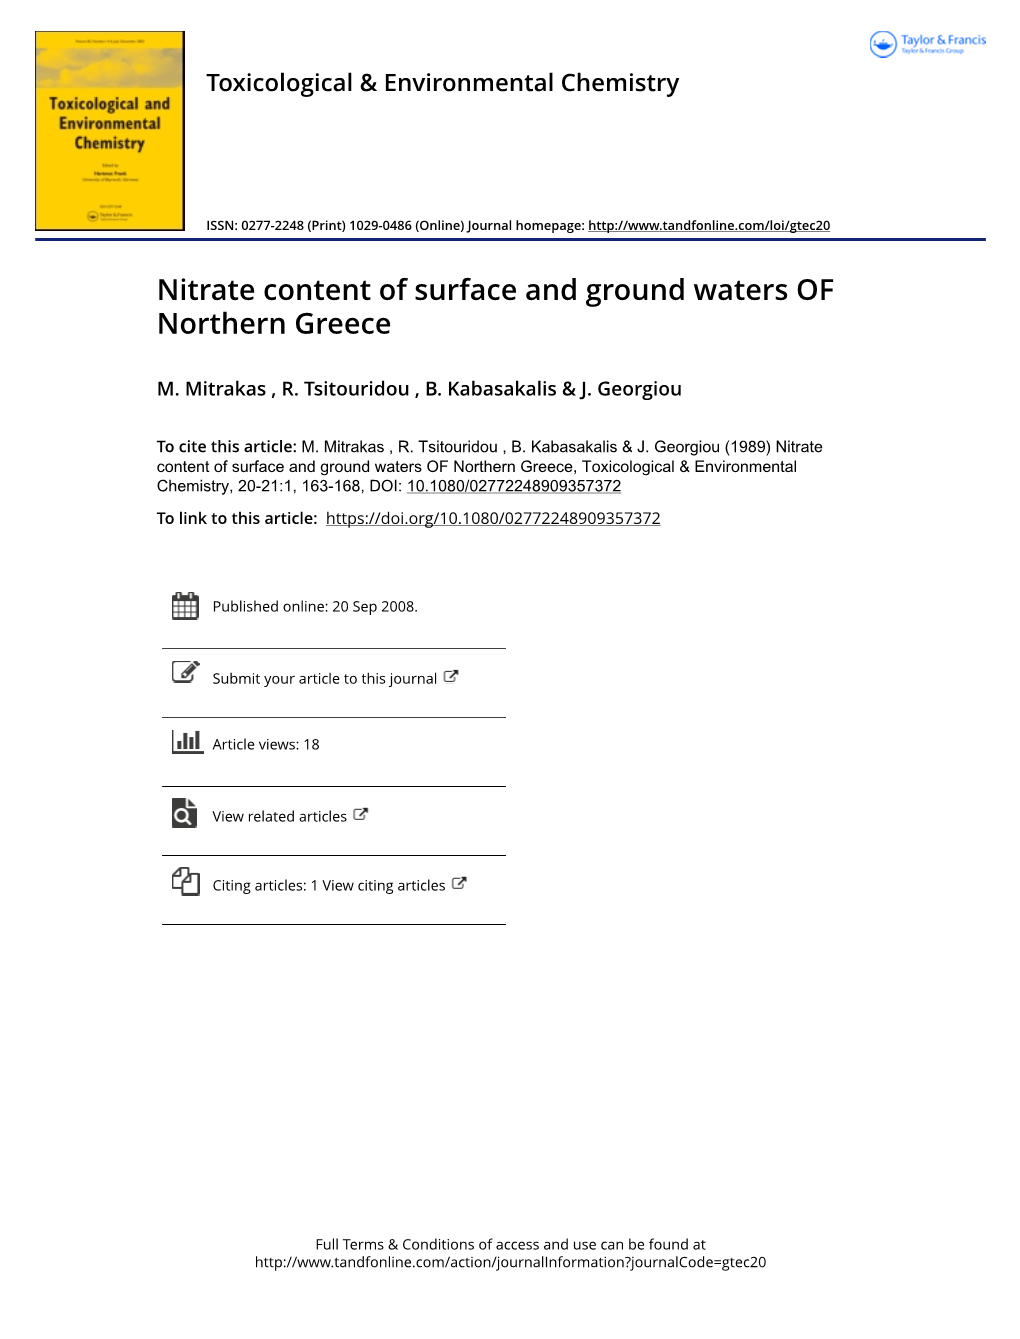 Nitrate Content of Surface and Ground Waters of Northern Greece